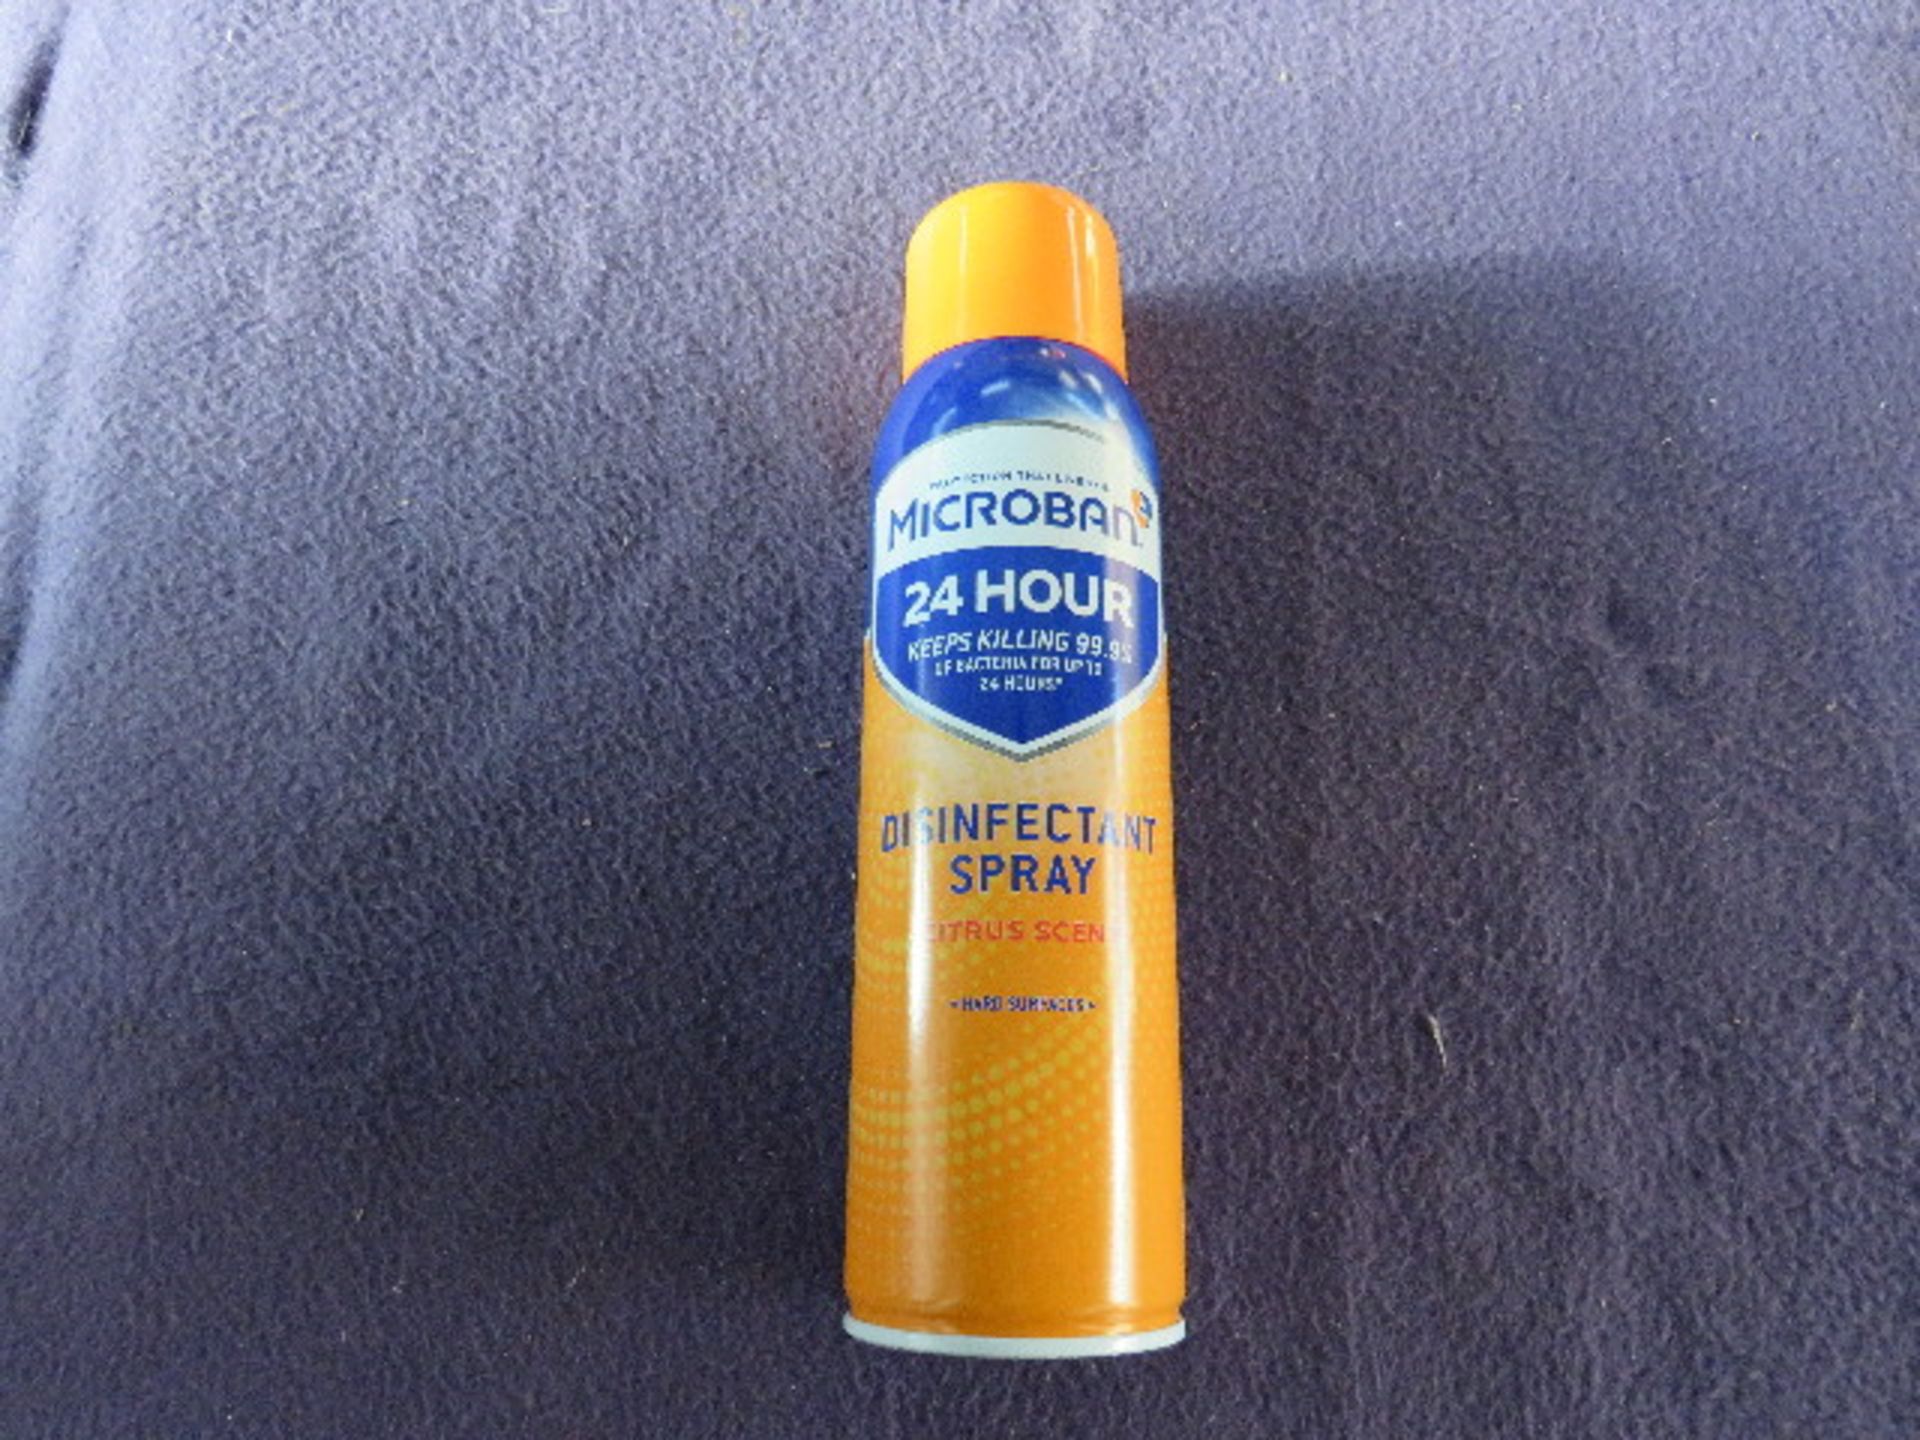 1x Box Containing 8x Microban - 24Hr Disfectant Spray With Citrus Scent - 400ml - New & Boxed. - Image 2 of 2